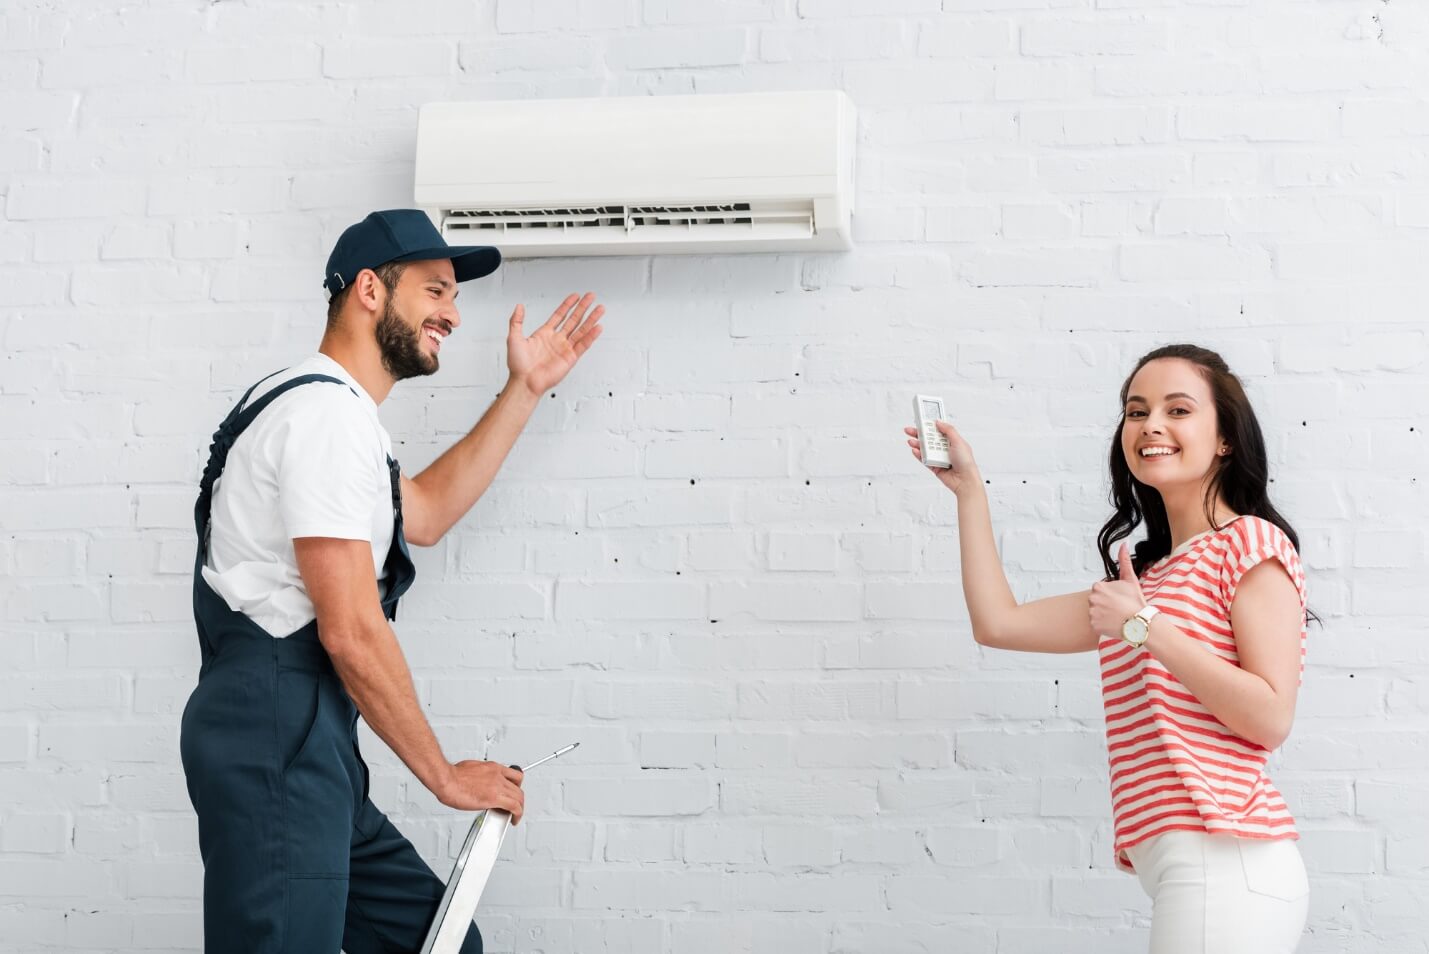 Air Conditioners: Repairs, Maintenance, and Installations